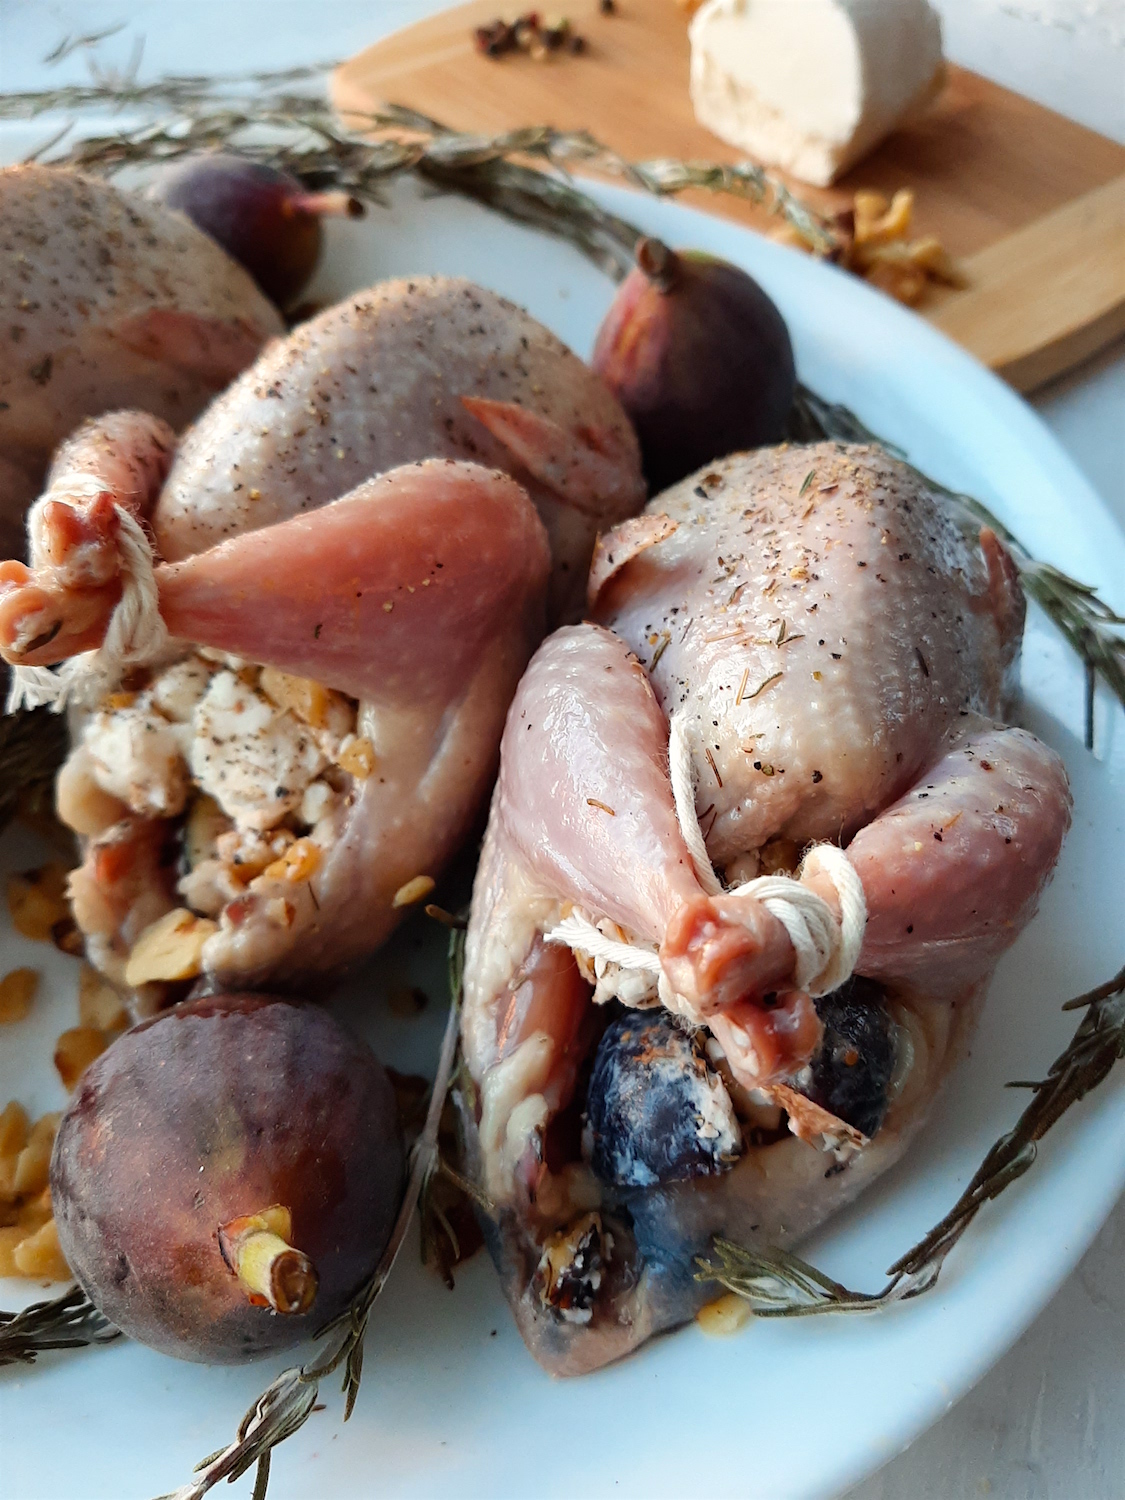 Roast Stuffed Quail with Goat Cheese, Figs, and Walnuts - Sugar and Spice